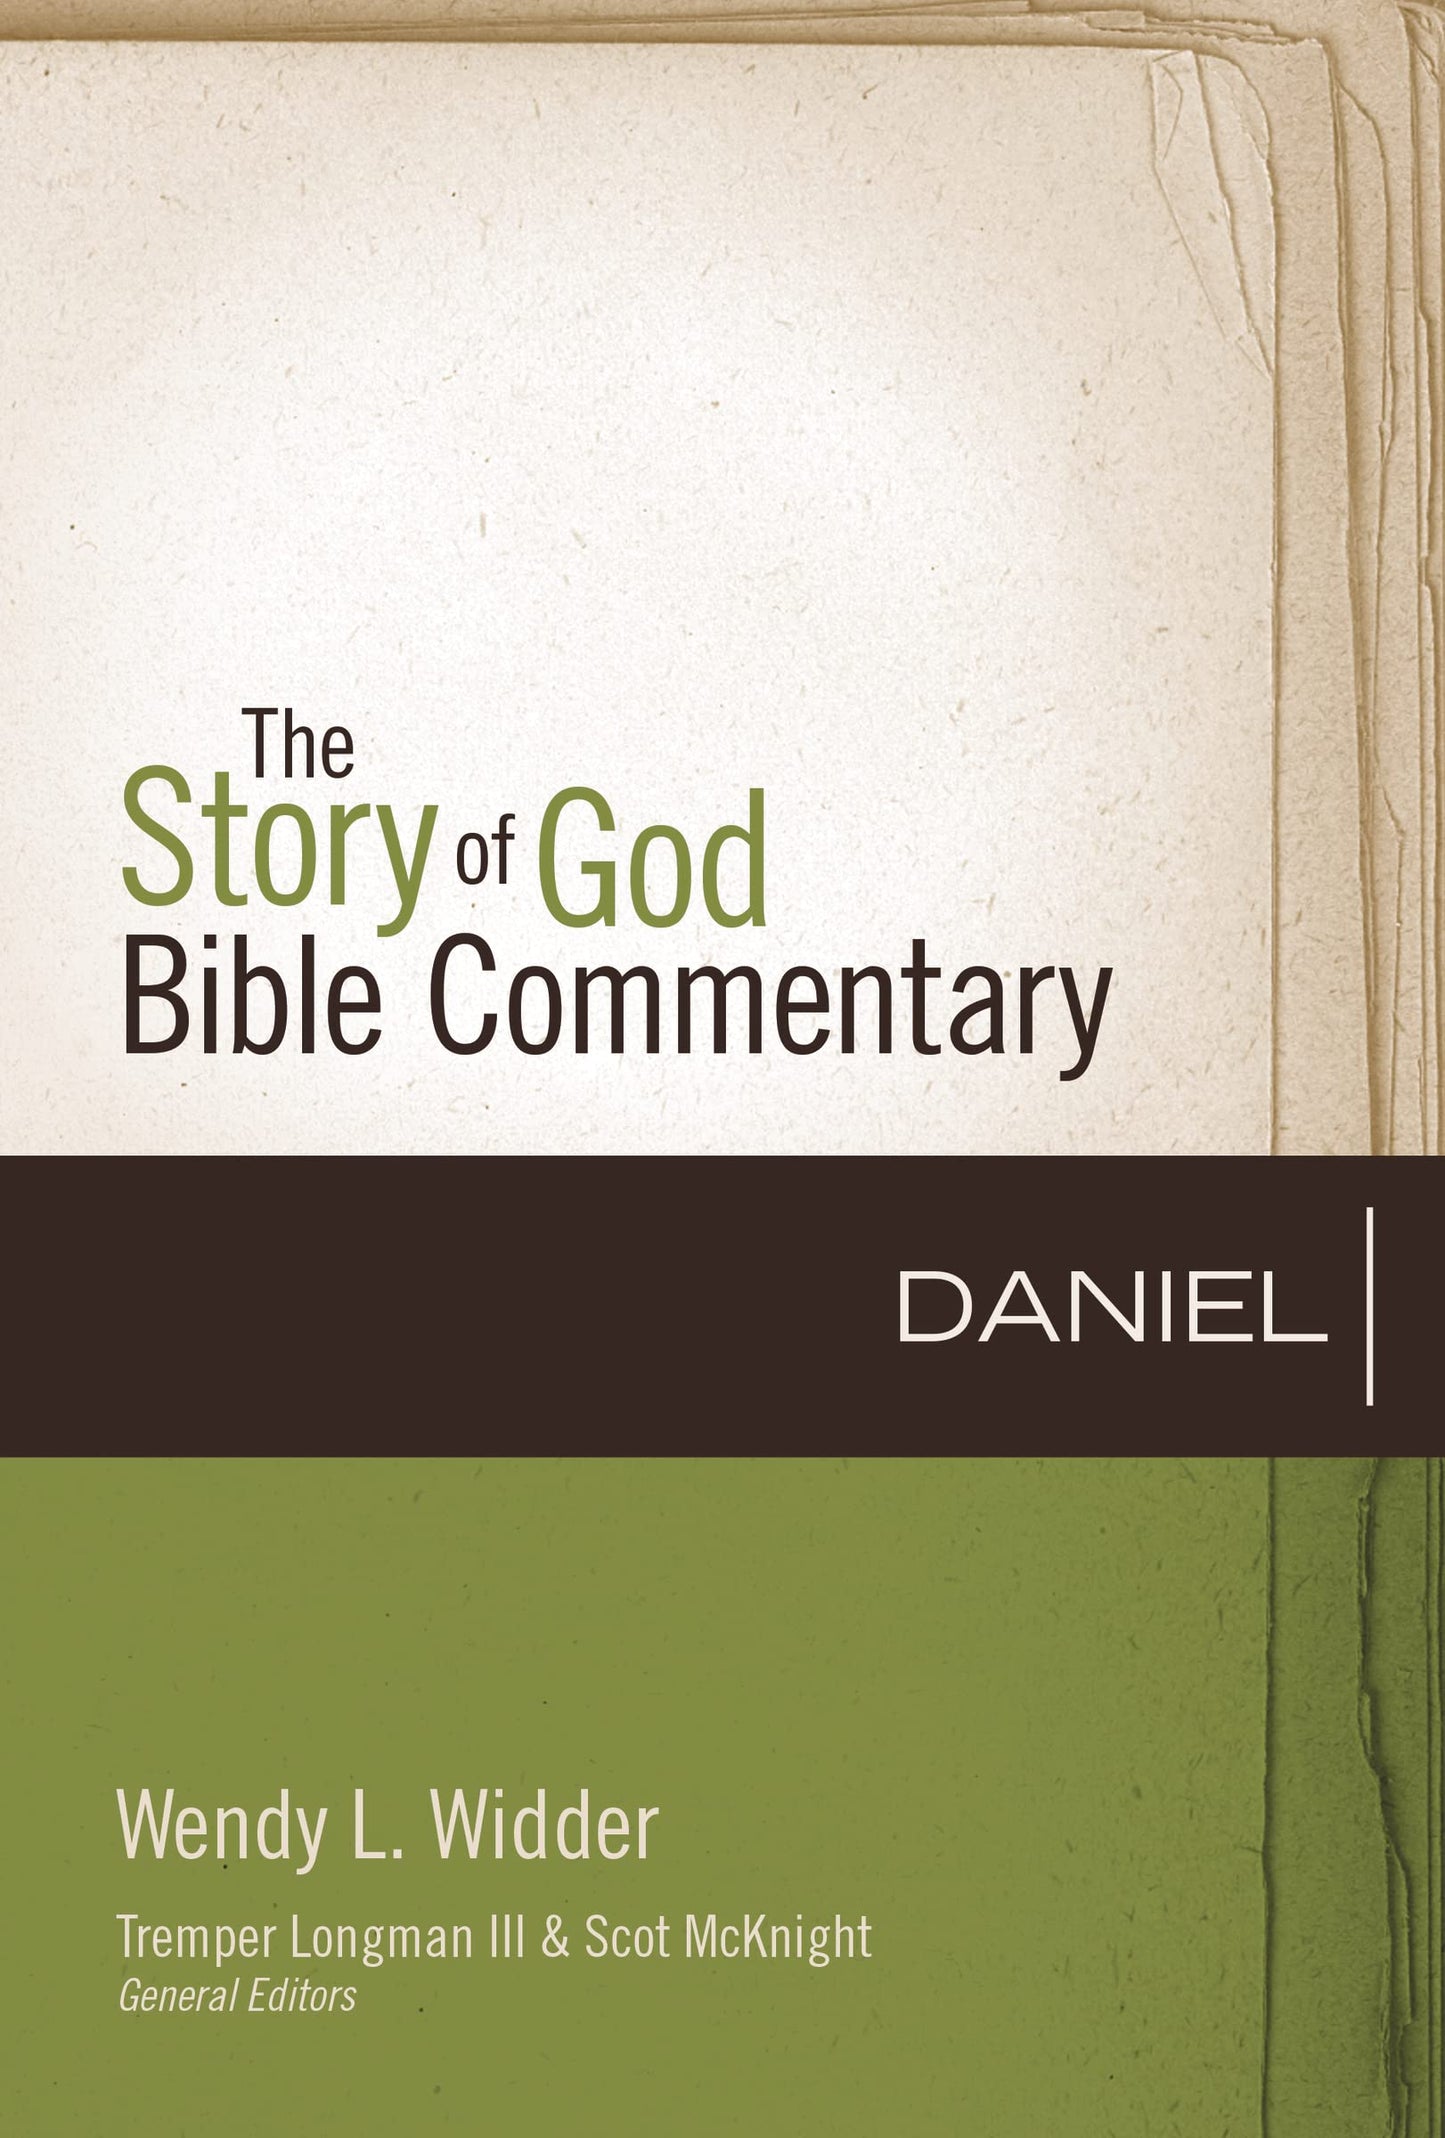 The Story of God Bible Commentary - Daniel